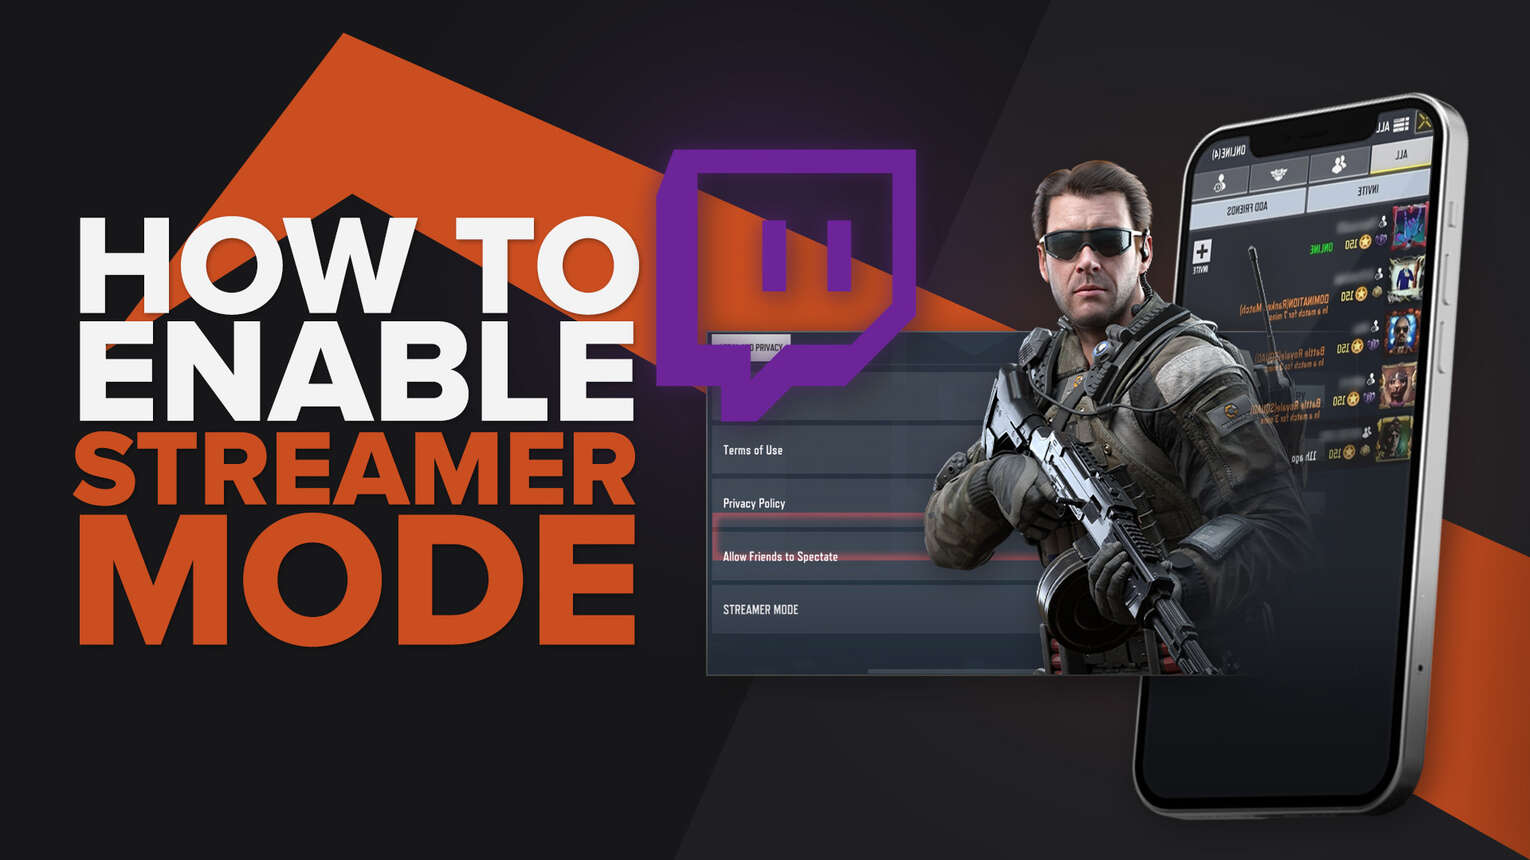 How to delete your account in COD Mobile: Step-by-step guide for